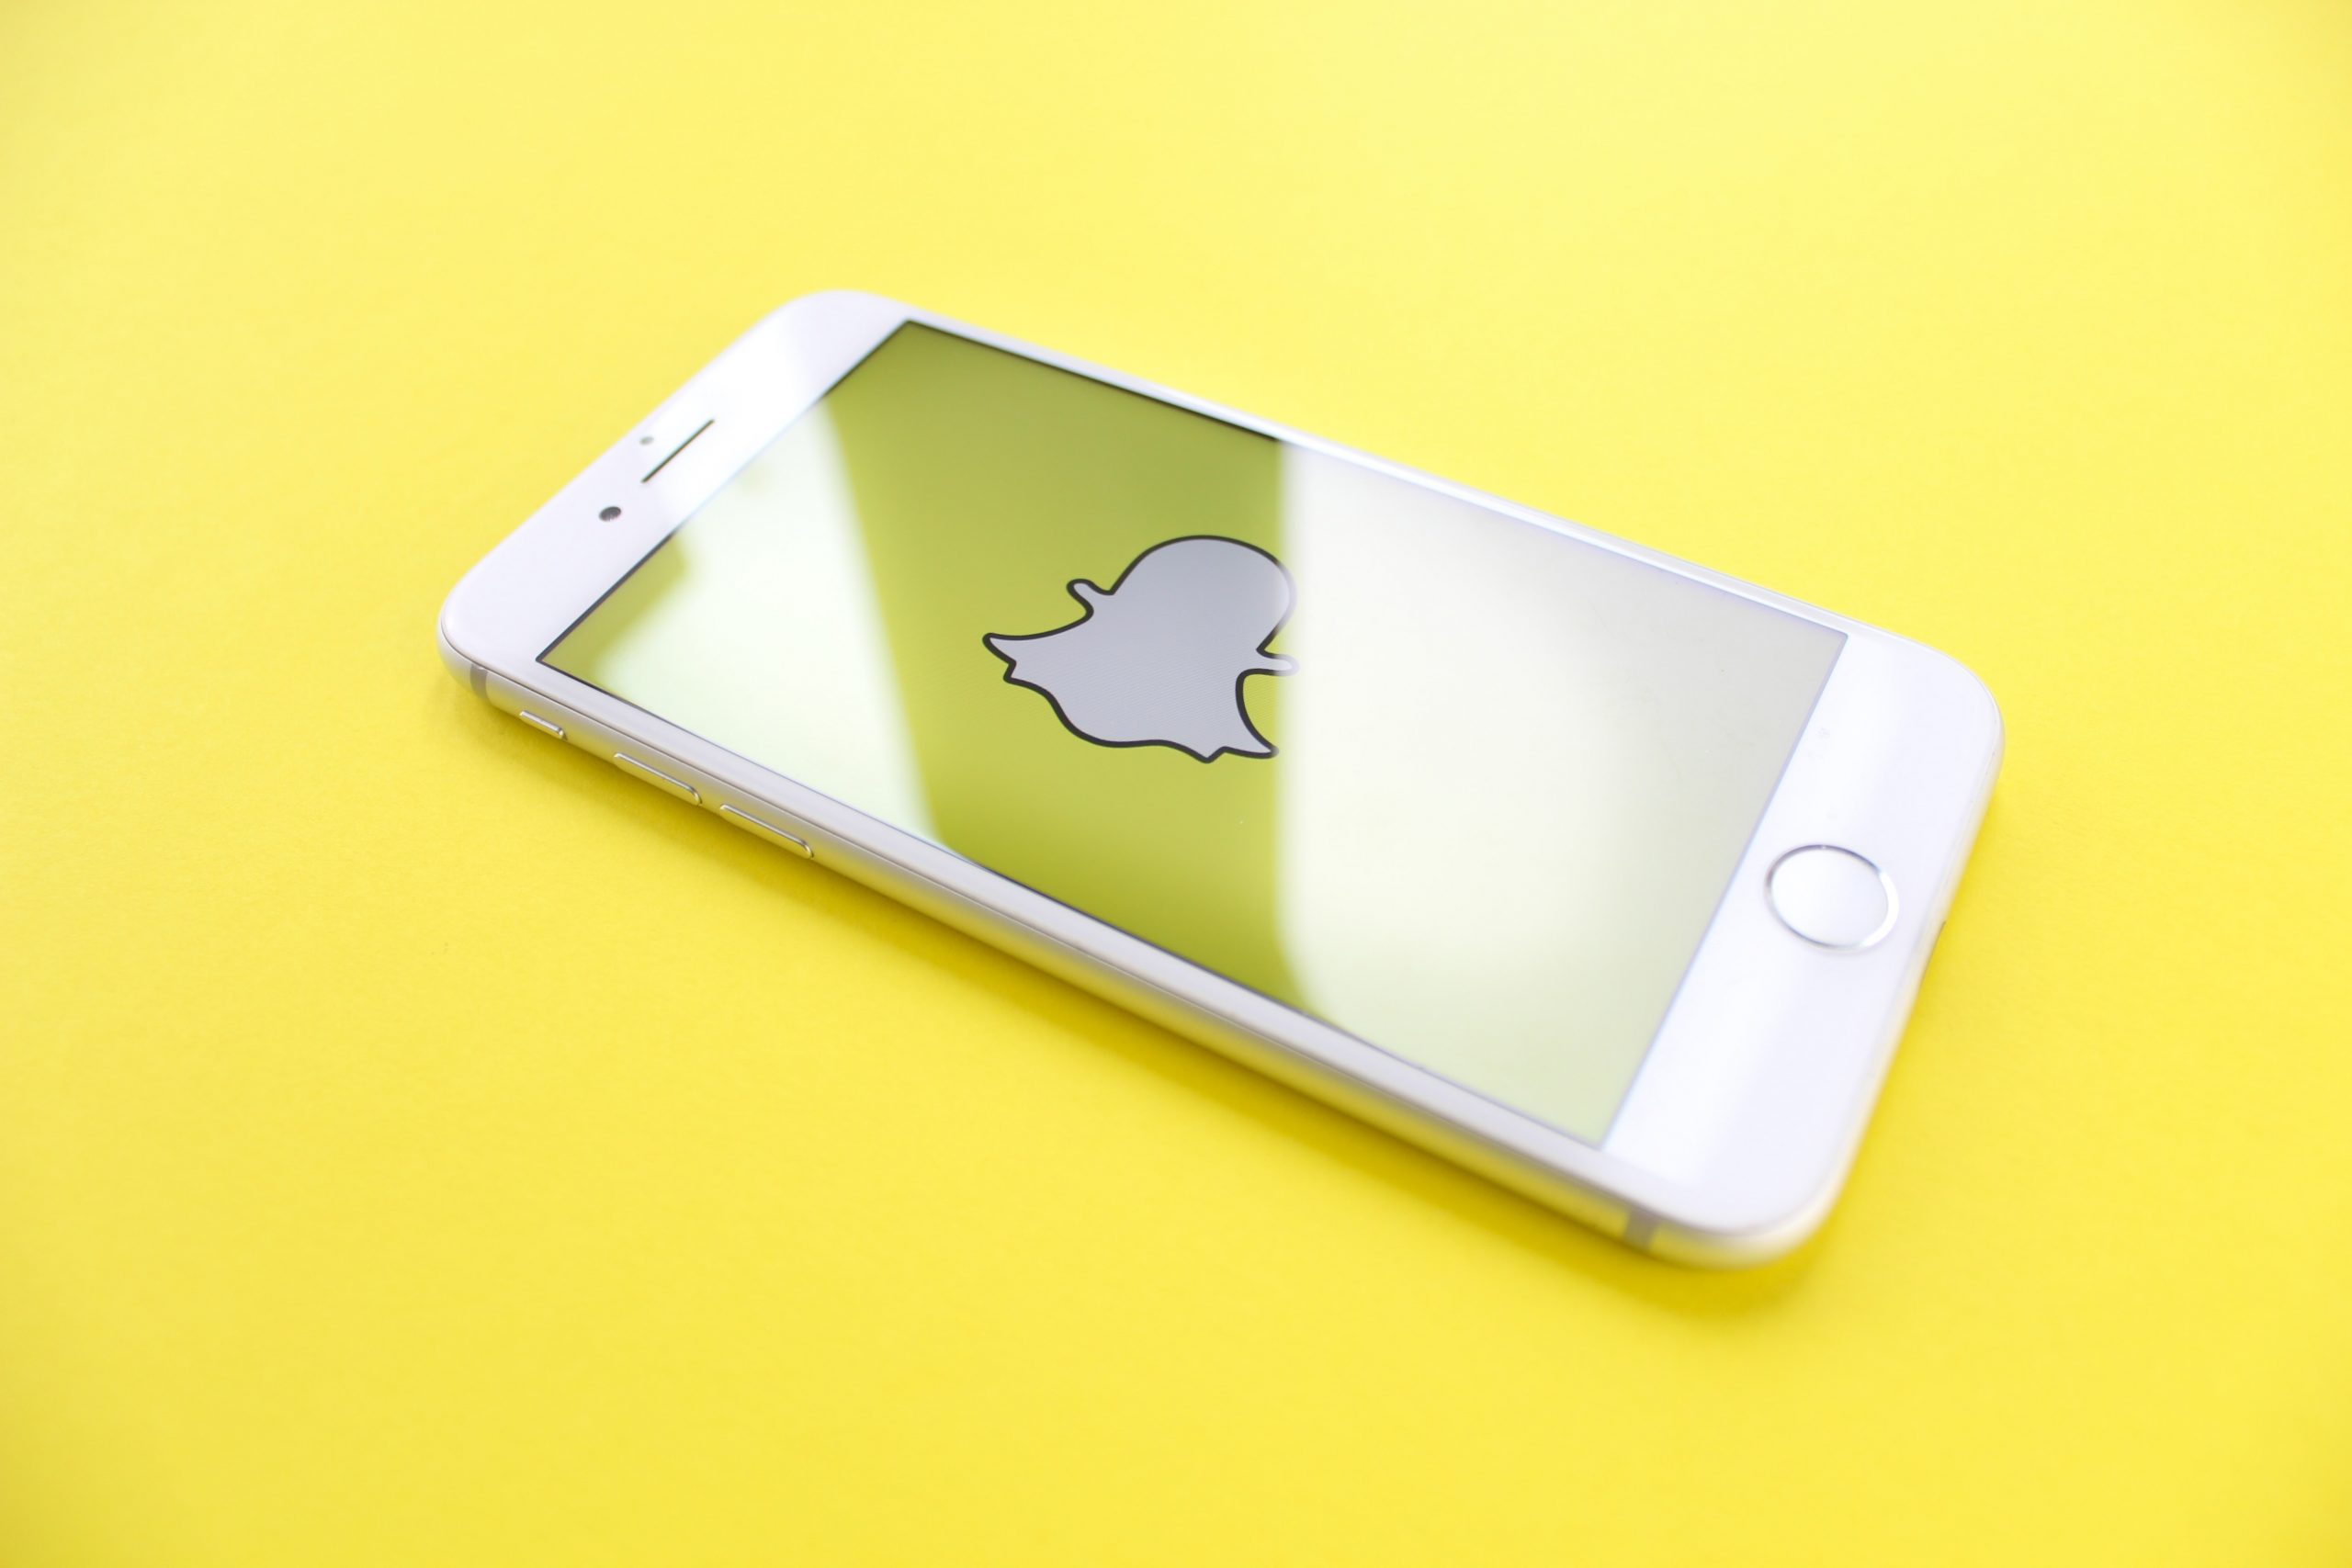 Snapchat’s India user base more than doubled in the second quarter